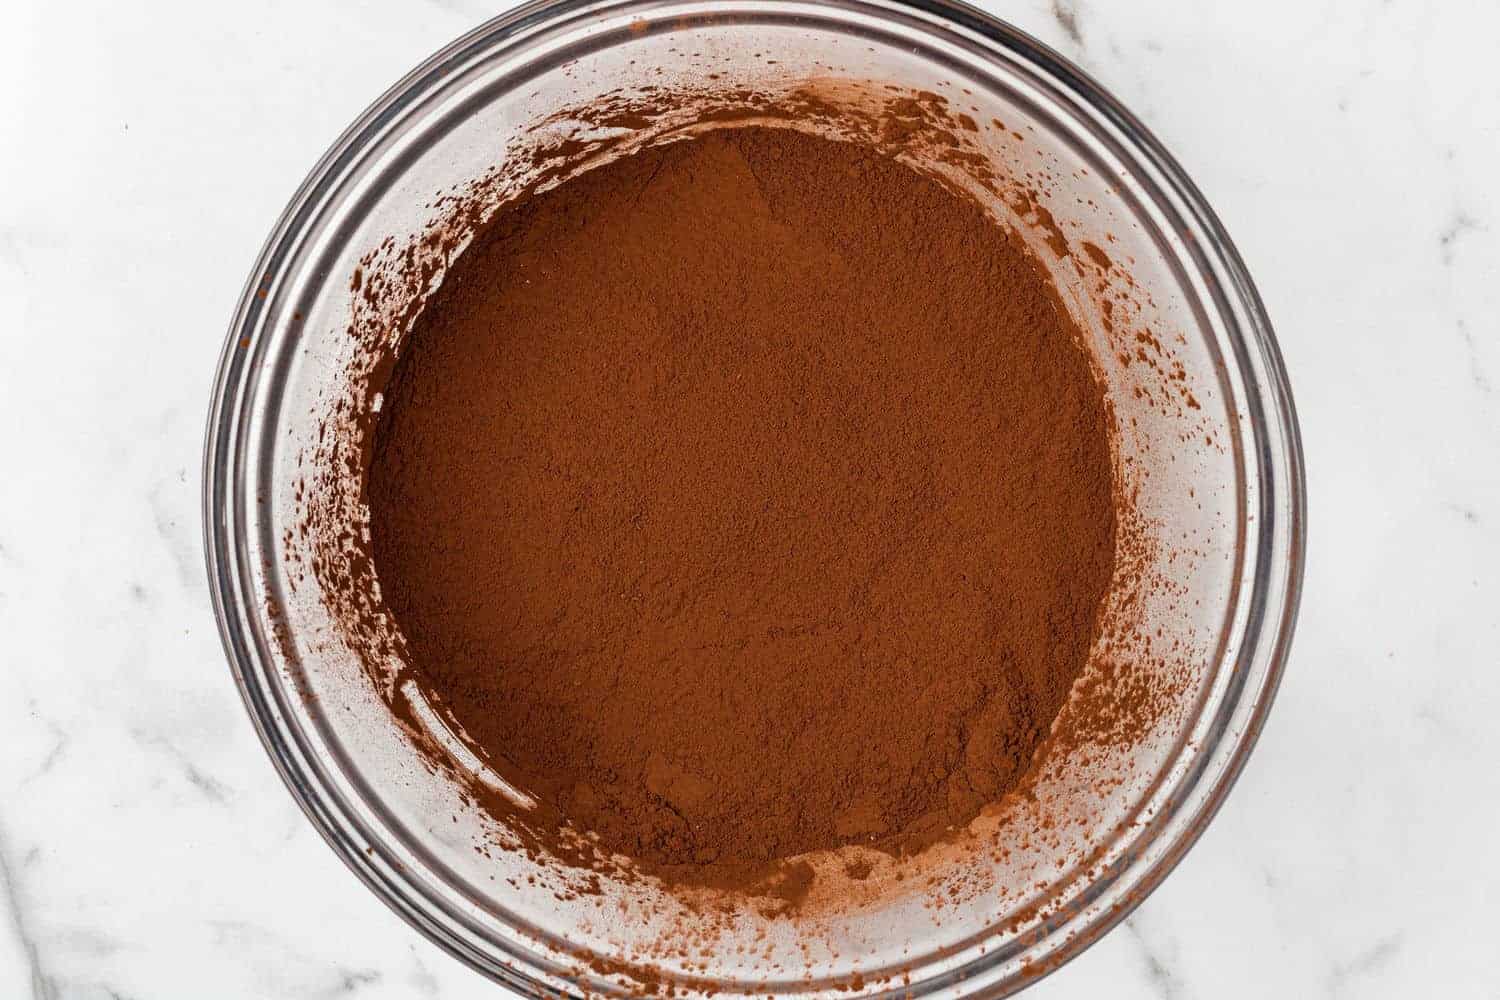 Cocoa powder in a glass mixing bowl.